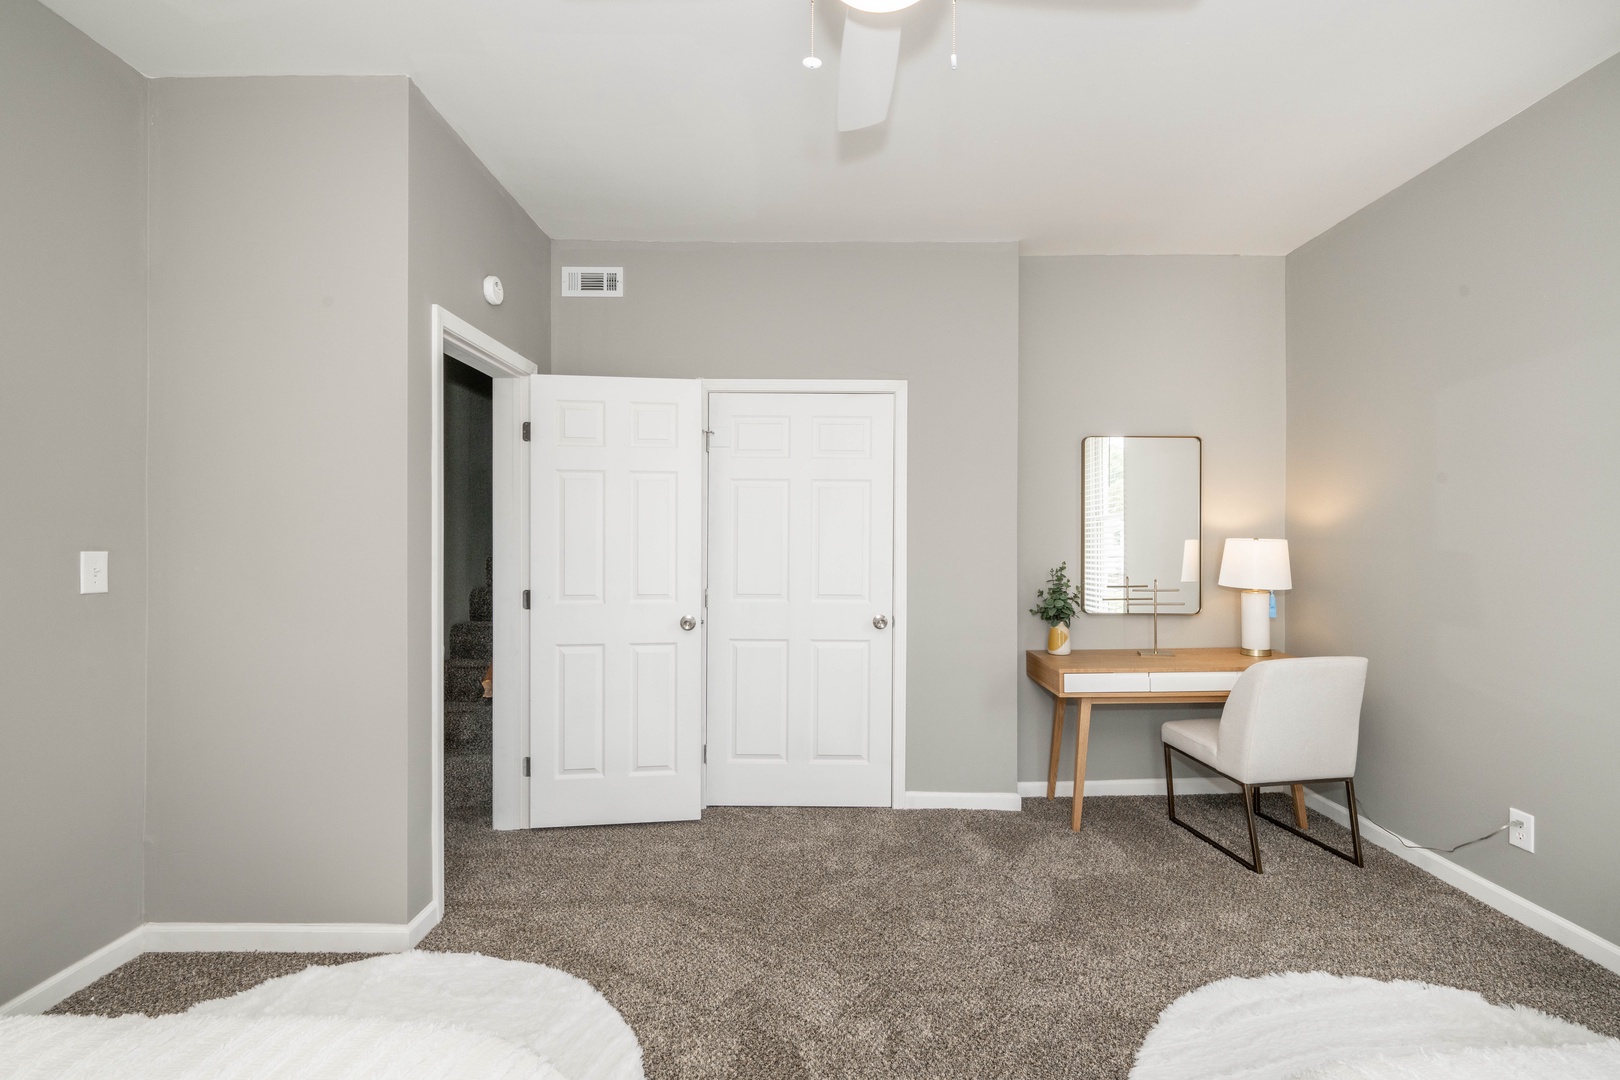 The final 2nd floor bedroom offers a pair of full-sized beds & vanity/desk space